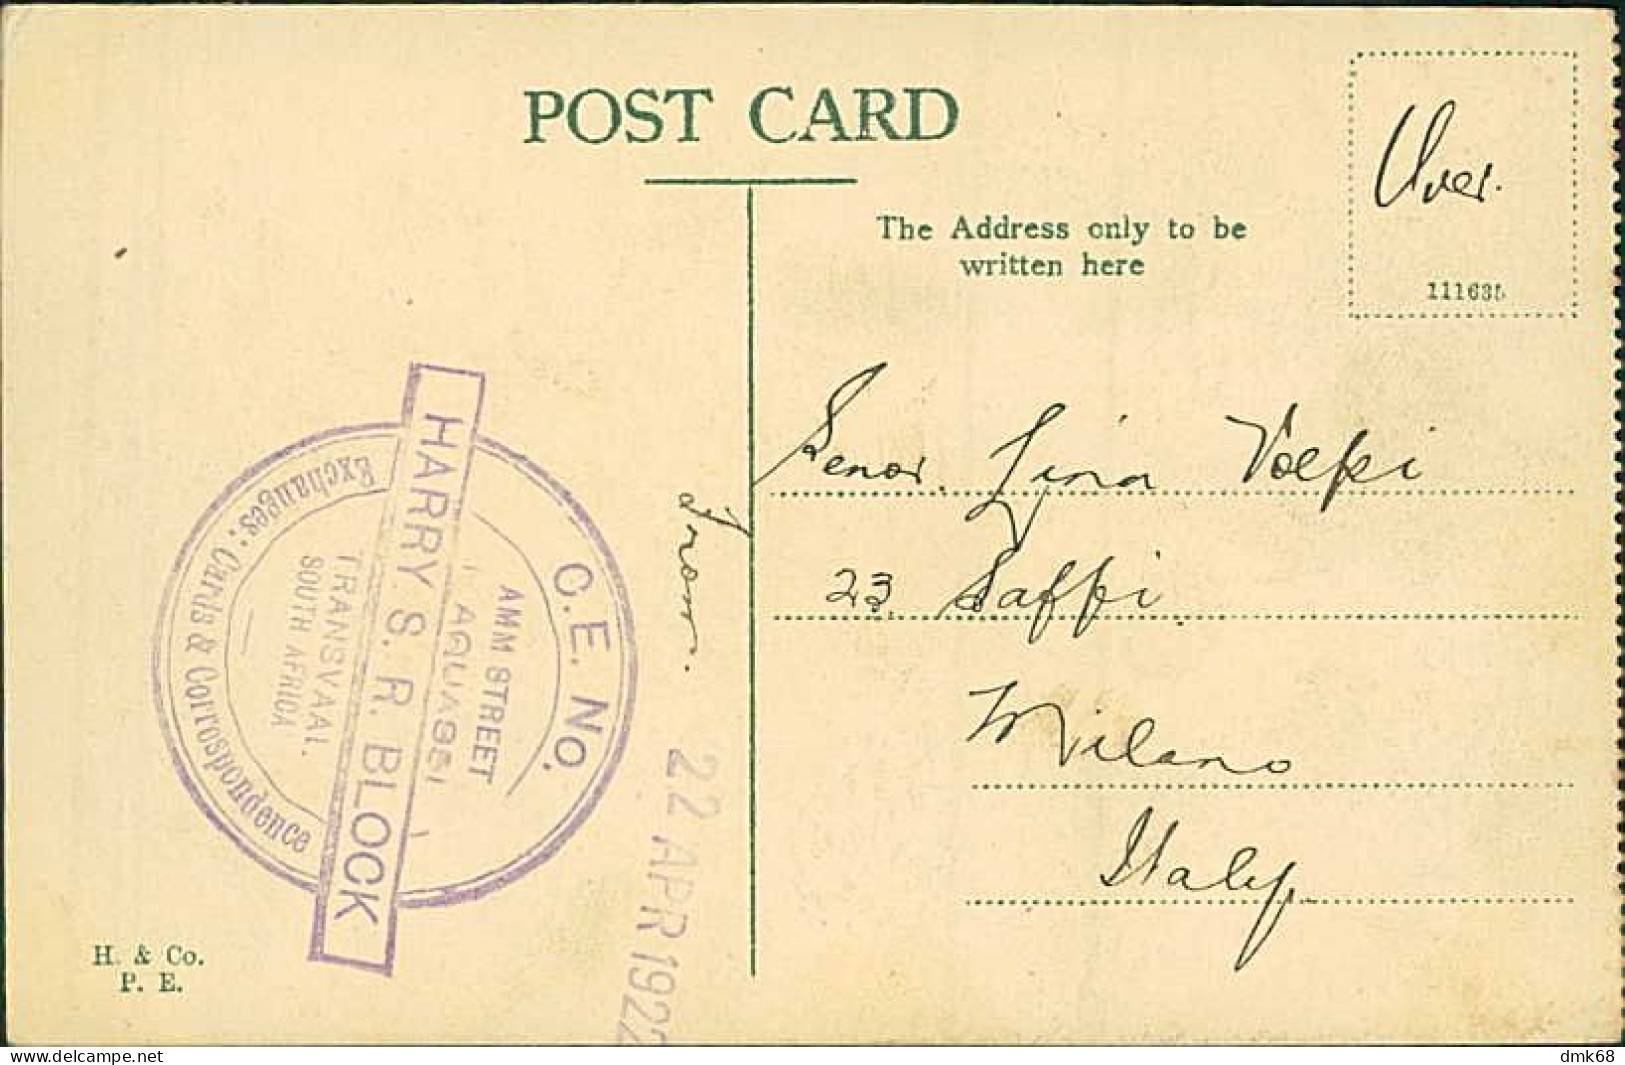 SOUTH AFRICA - PRETORIA - CHURCH SQUARE - EDIT. H.&CO. P.E. - MAILED TO ITALY 1922 / STAMPS (12582) - Zuid-Afrika